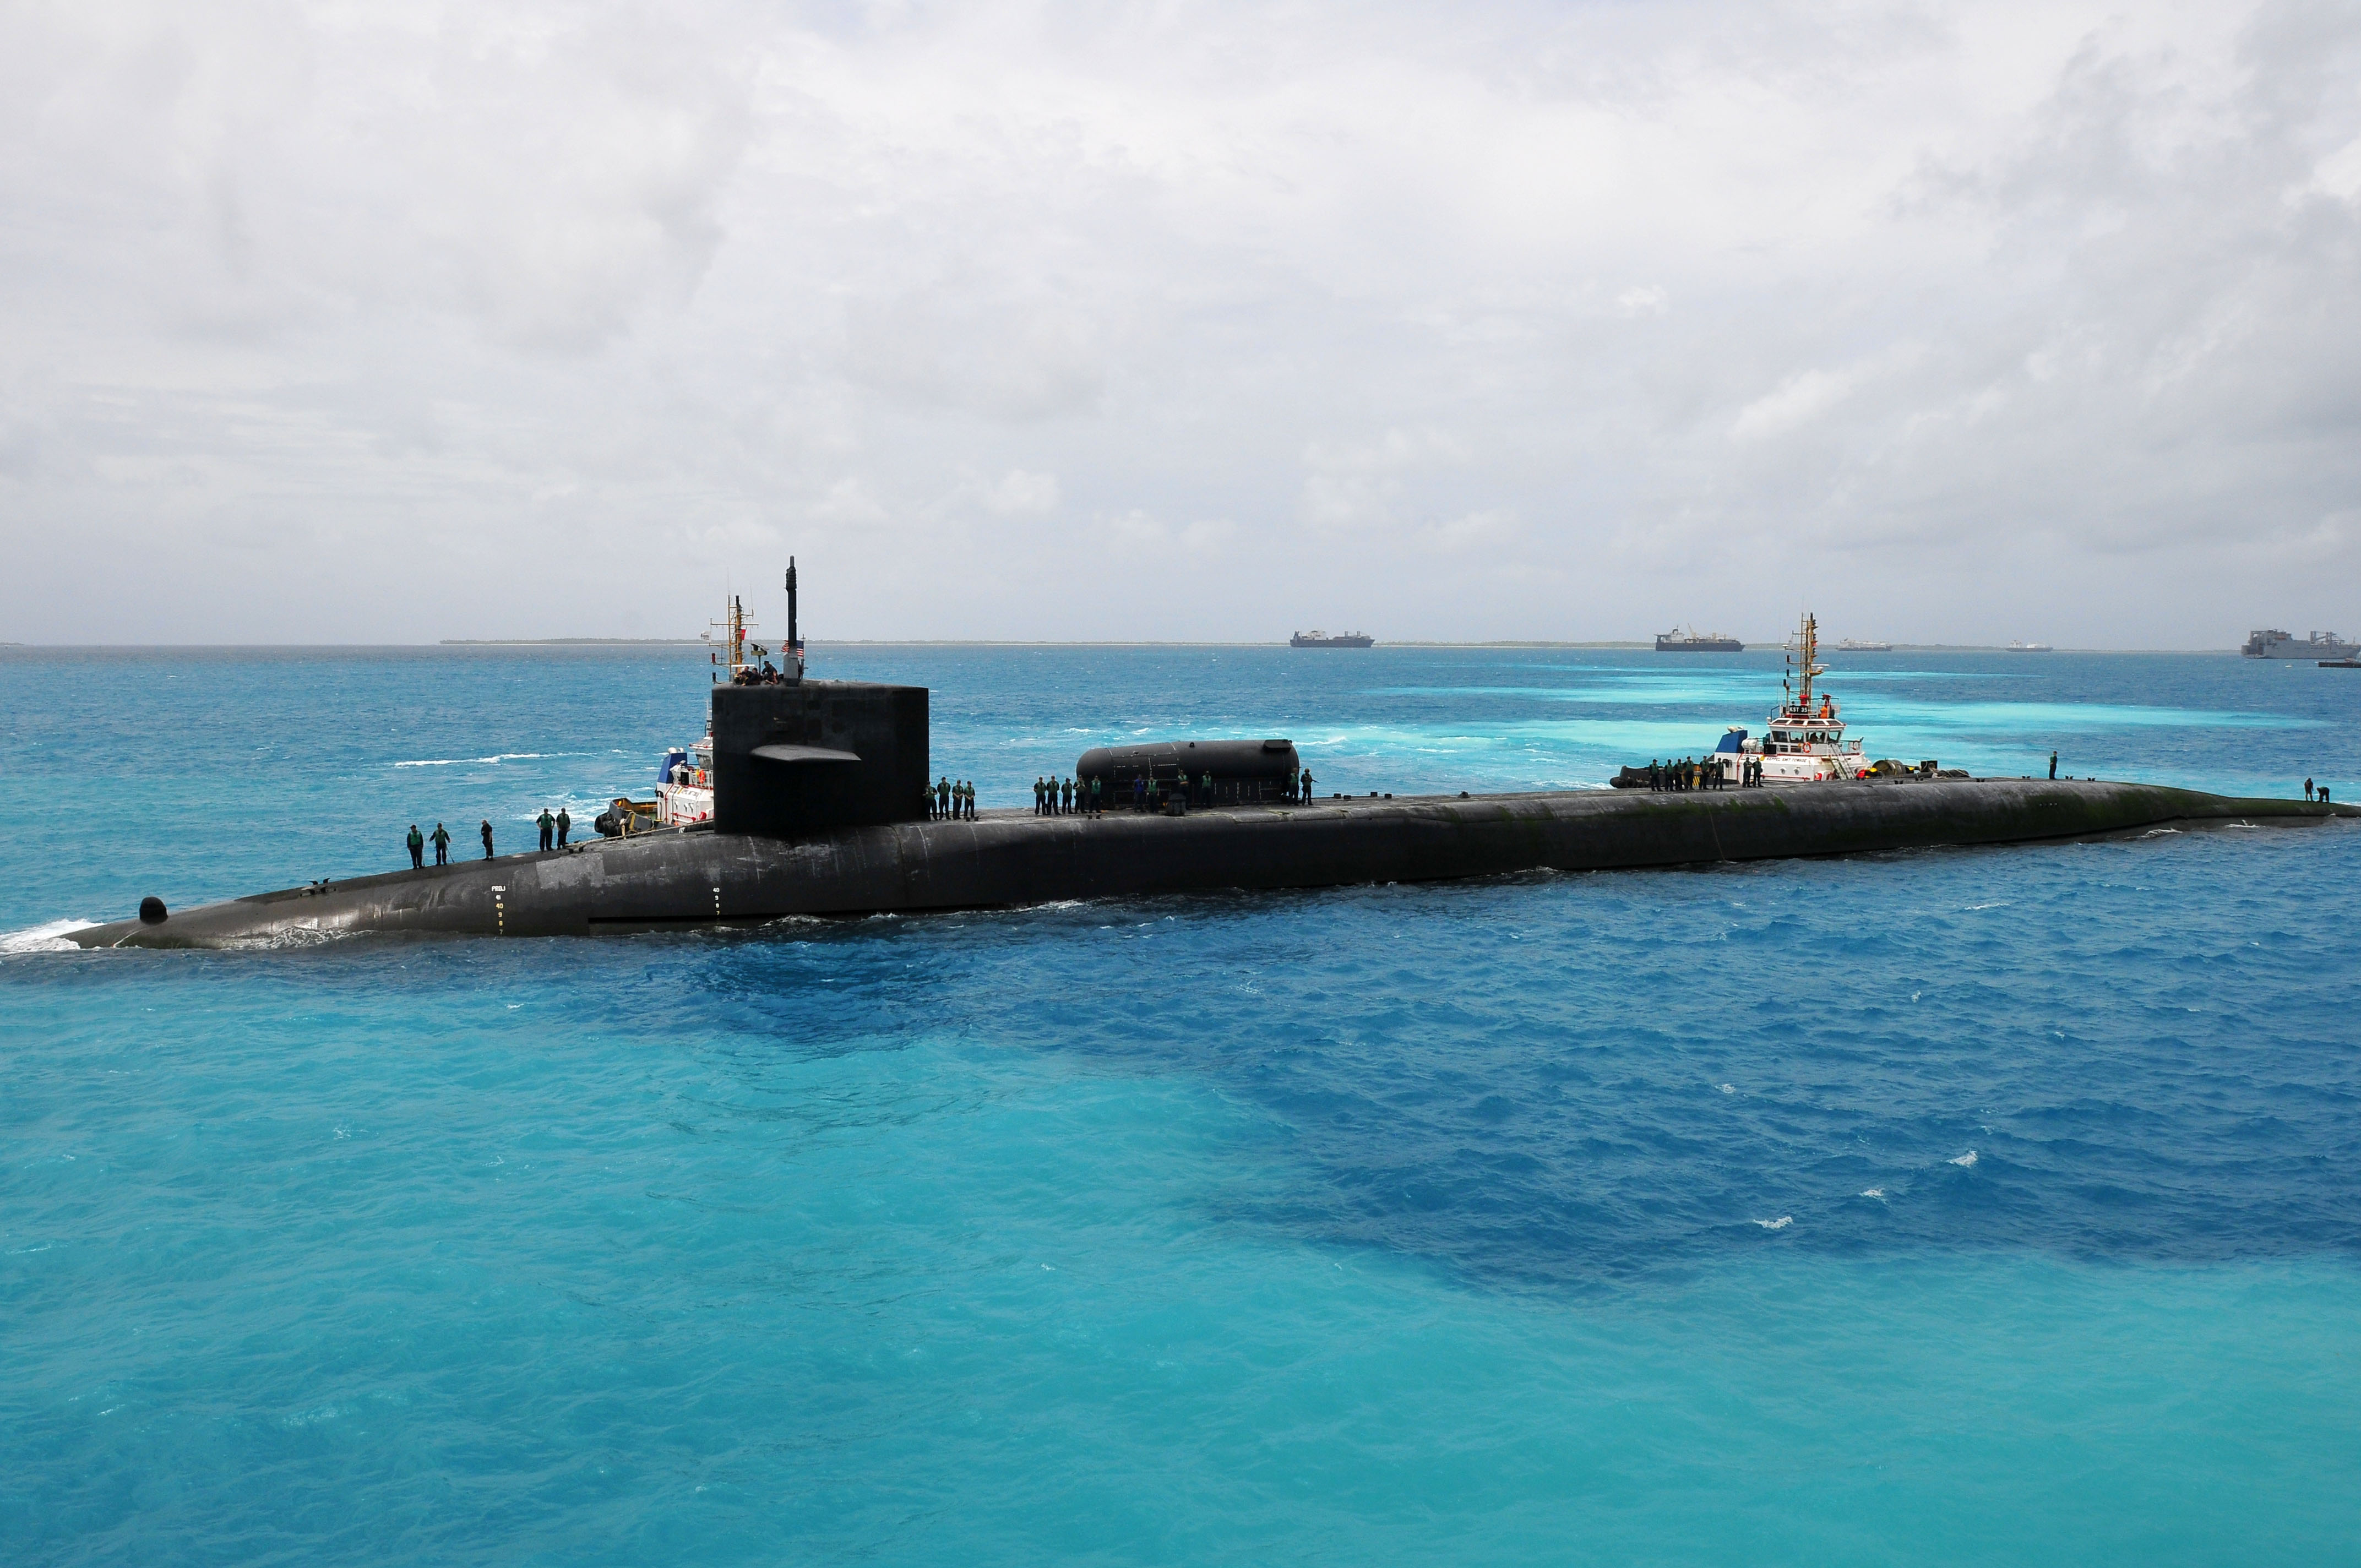 US_Navy_110905-N-JH293-063_The_Ohio-class_guided-missile_submarine_USS_Georgia_%28SSGN_729%29_prepares_to_moor_outboard_of_the_submarine_tender_USS_Emo.jpg